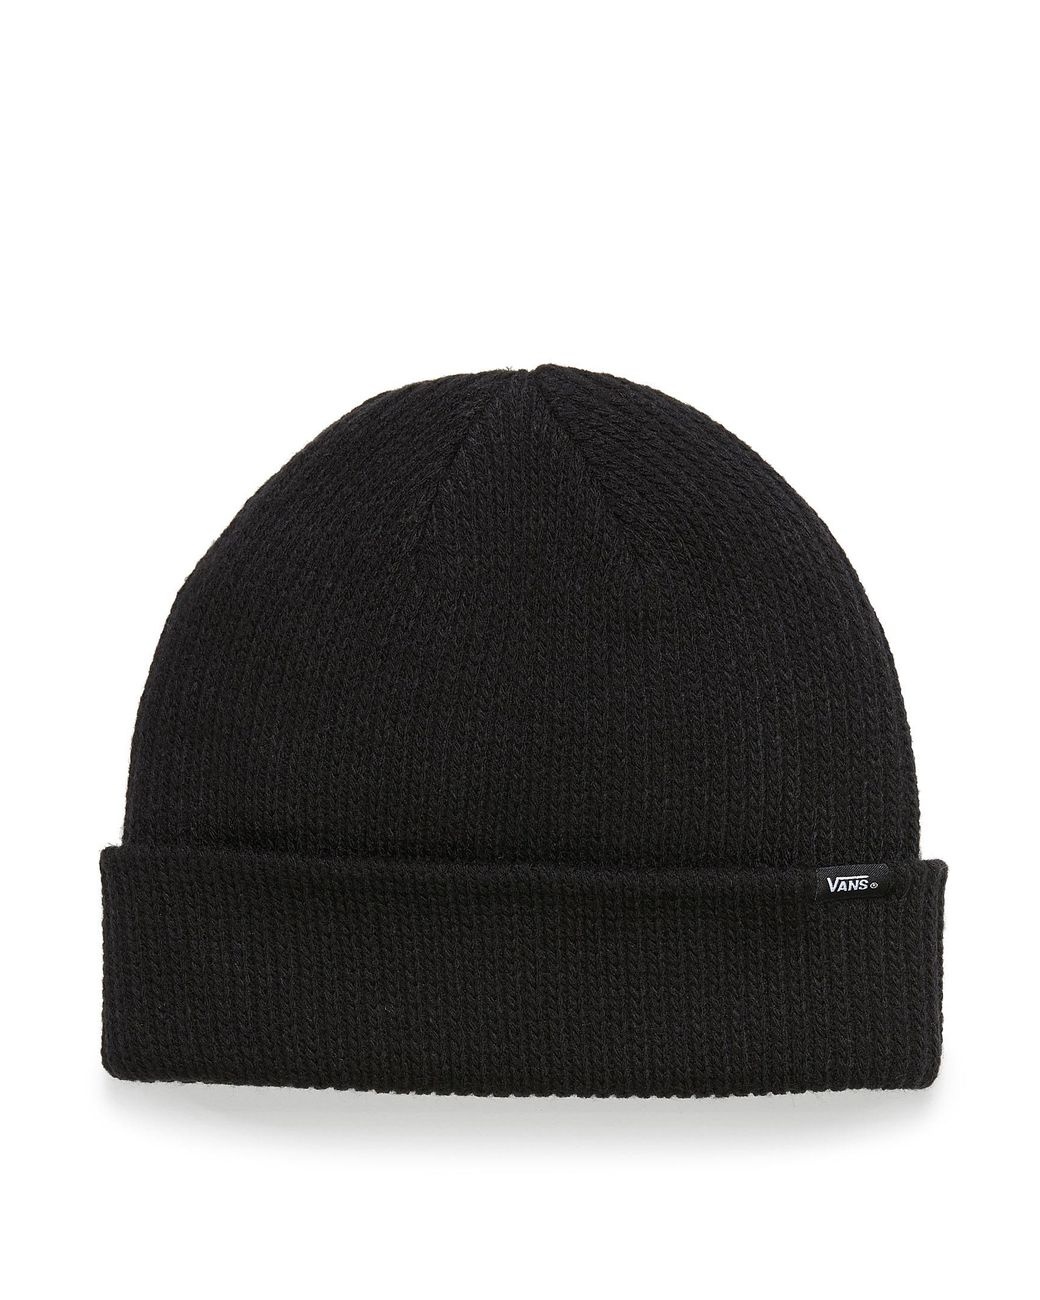 Vans Synthetic Core Cuffed Tuque in Black for Men - Lyst